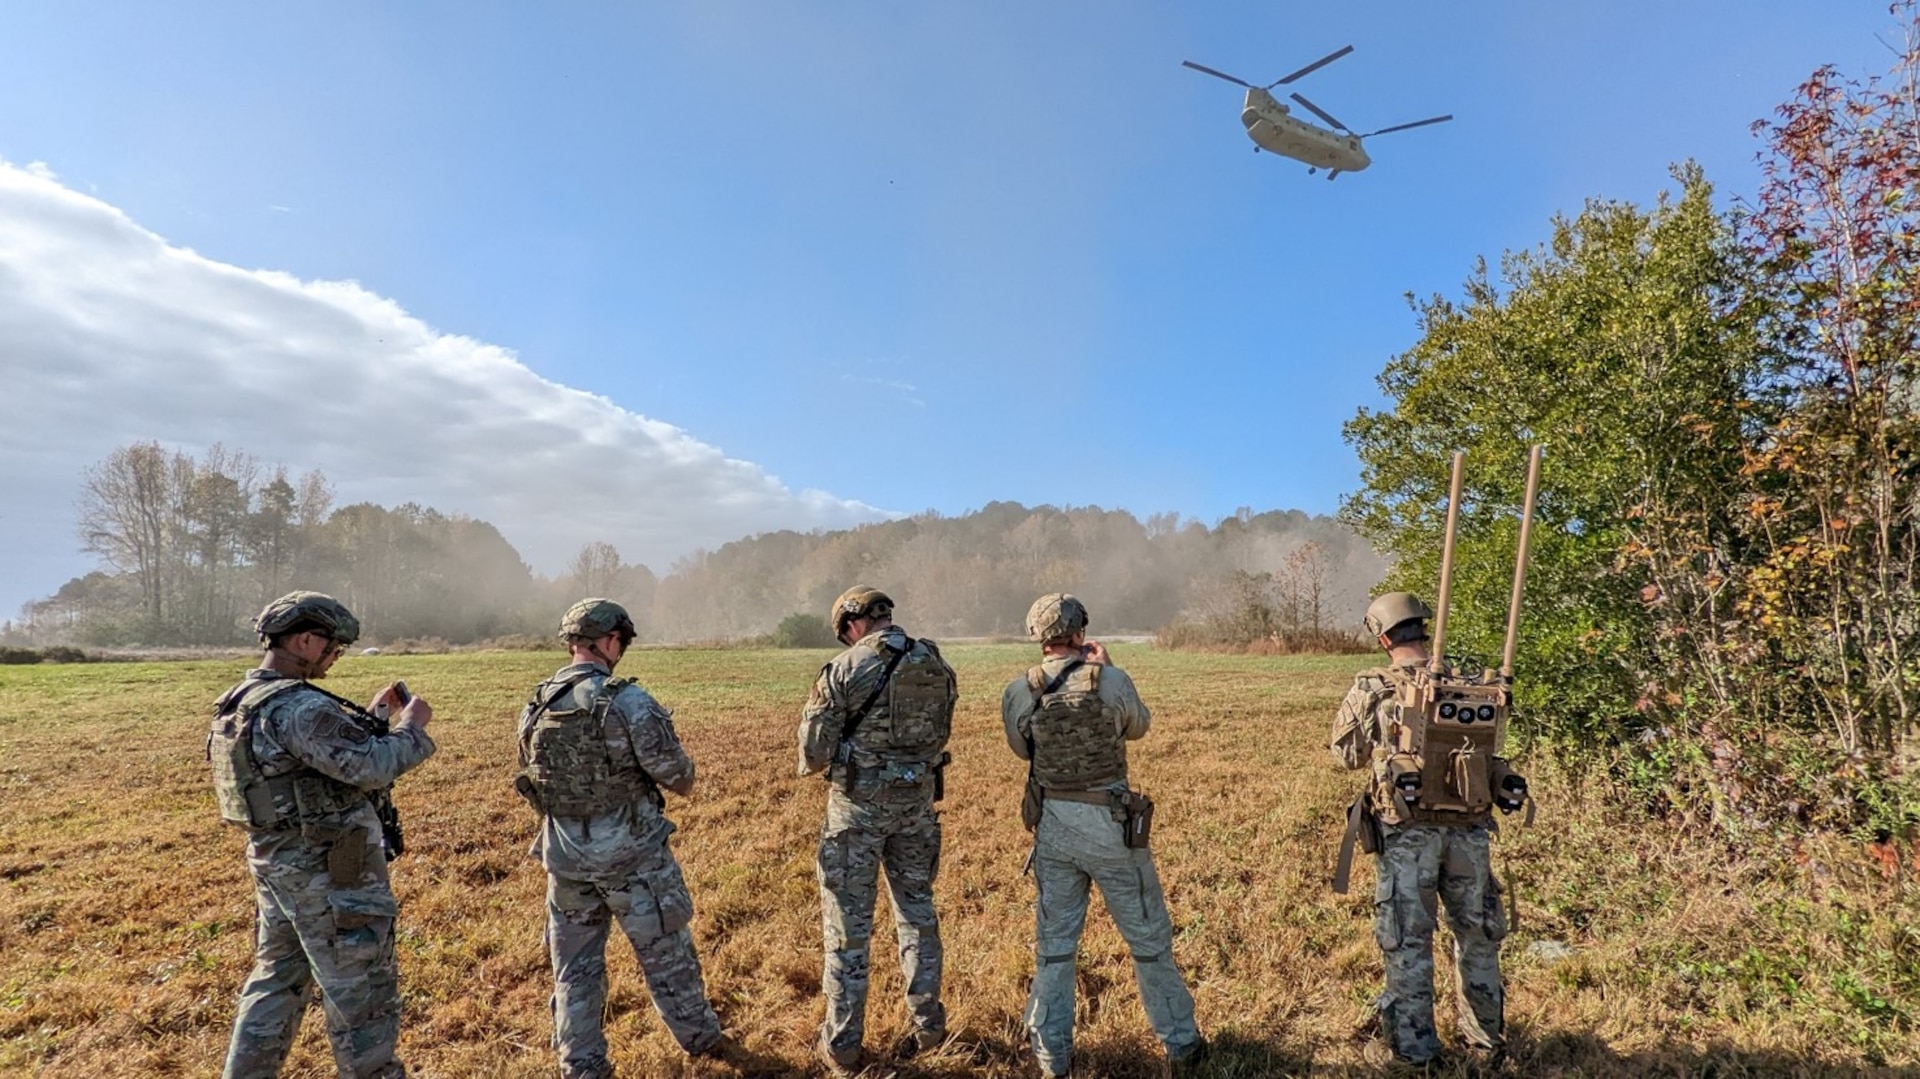 Airmen at Joint Base Langley Eustis, Virginia perform field exercises during Force Protection Operational Rehearsal (FPOR). An Airman (right) carries the dismounted “manpack” JCREW system to show capabilities during the event in November of 2022.